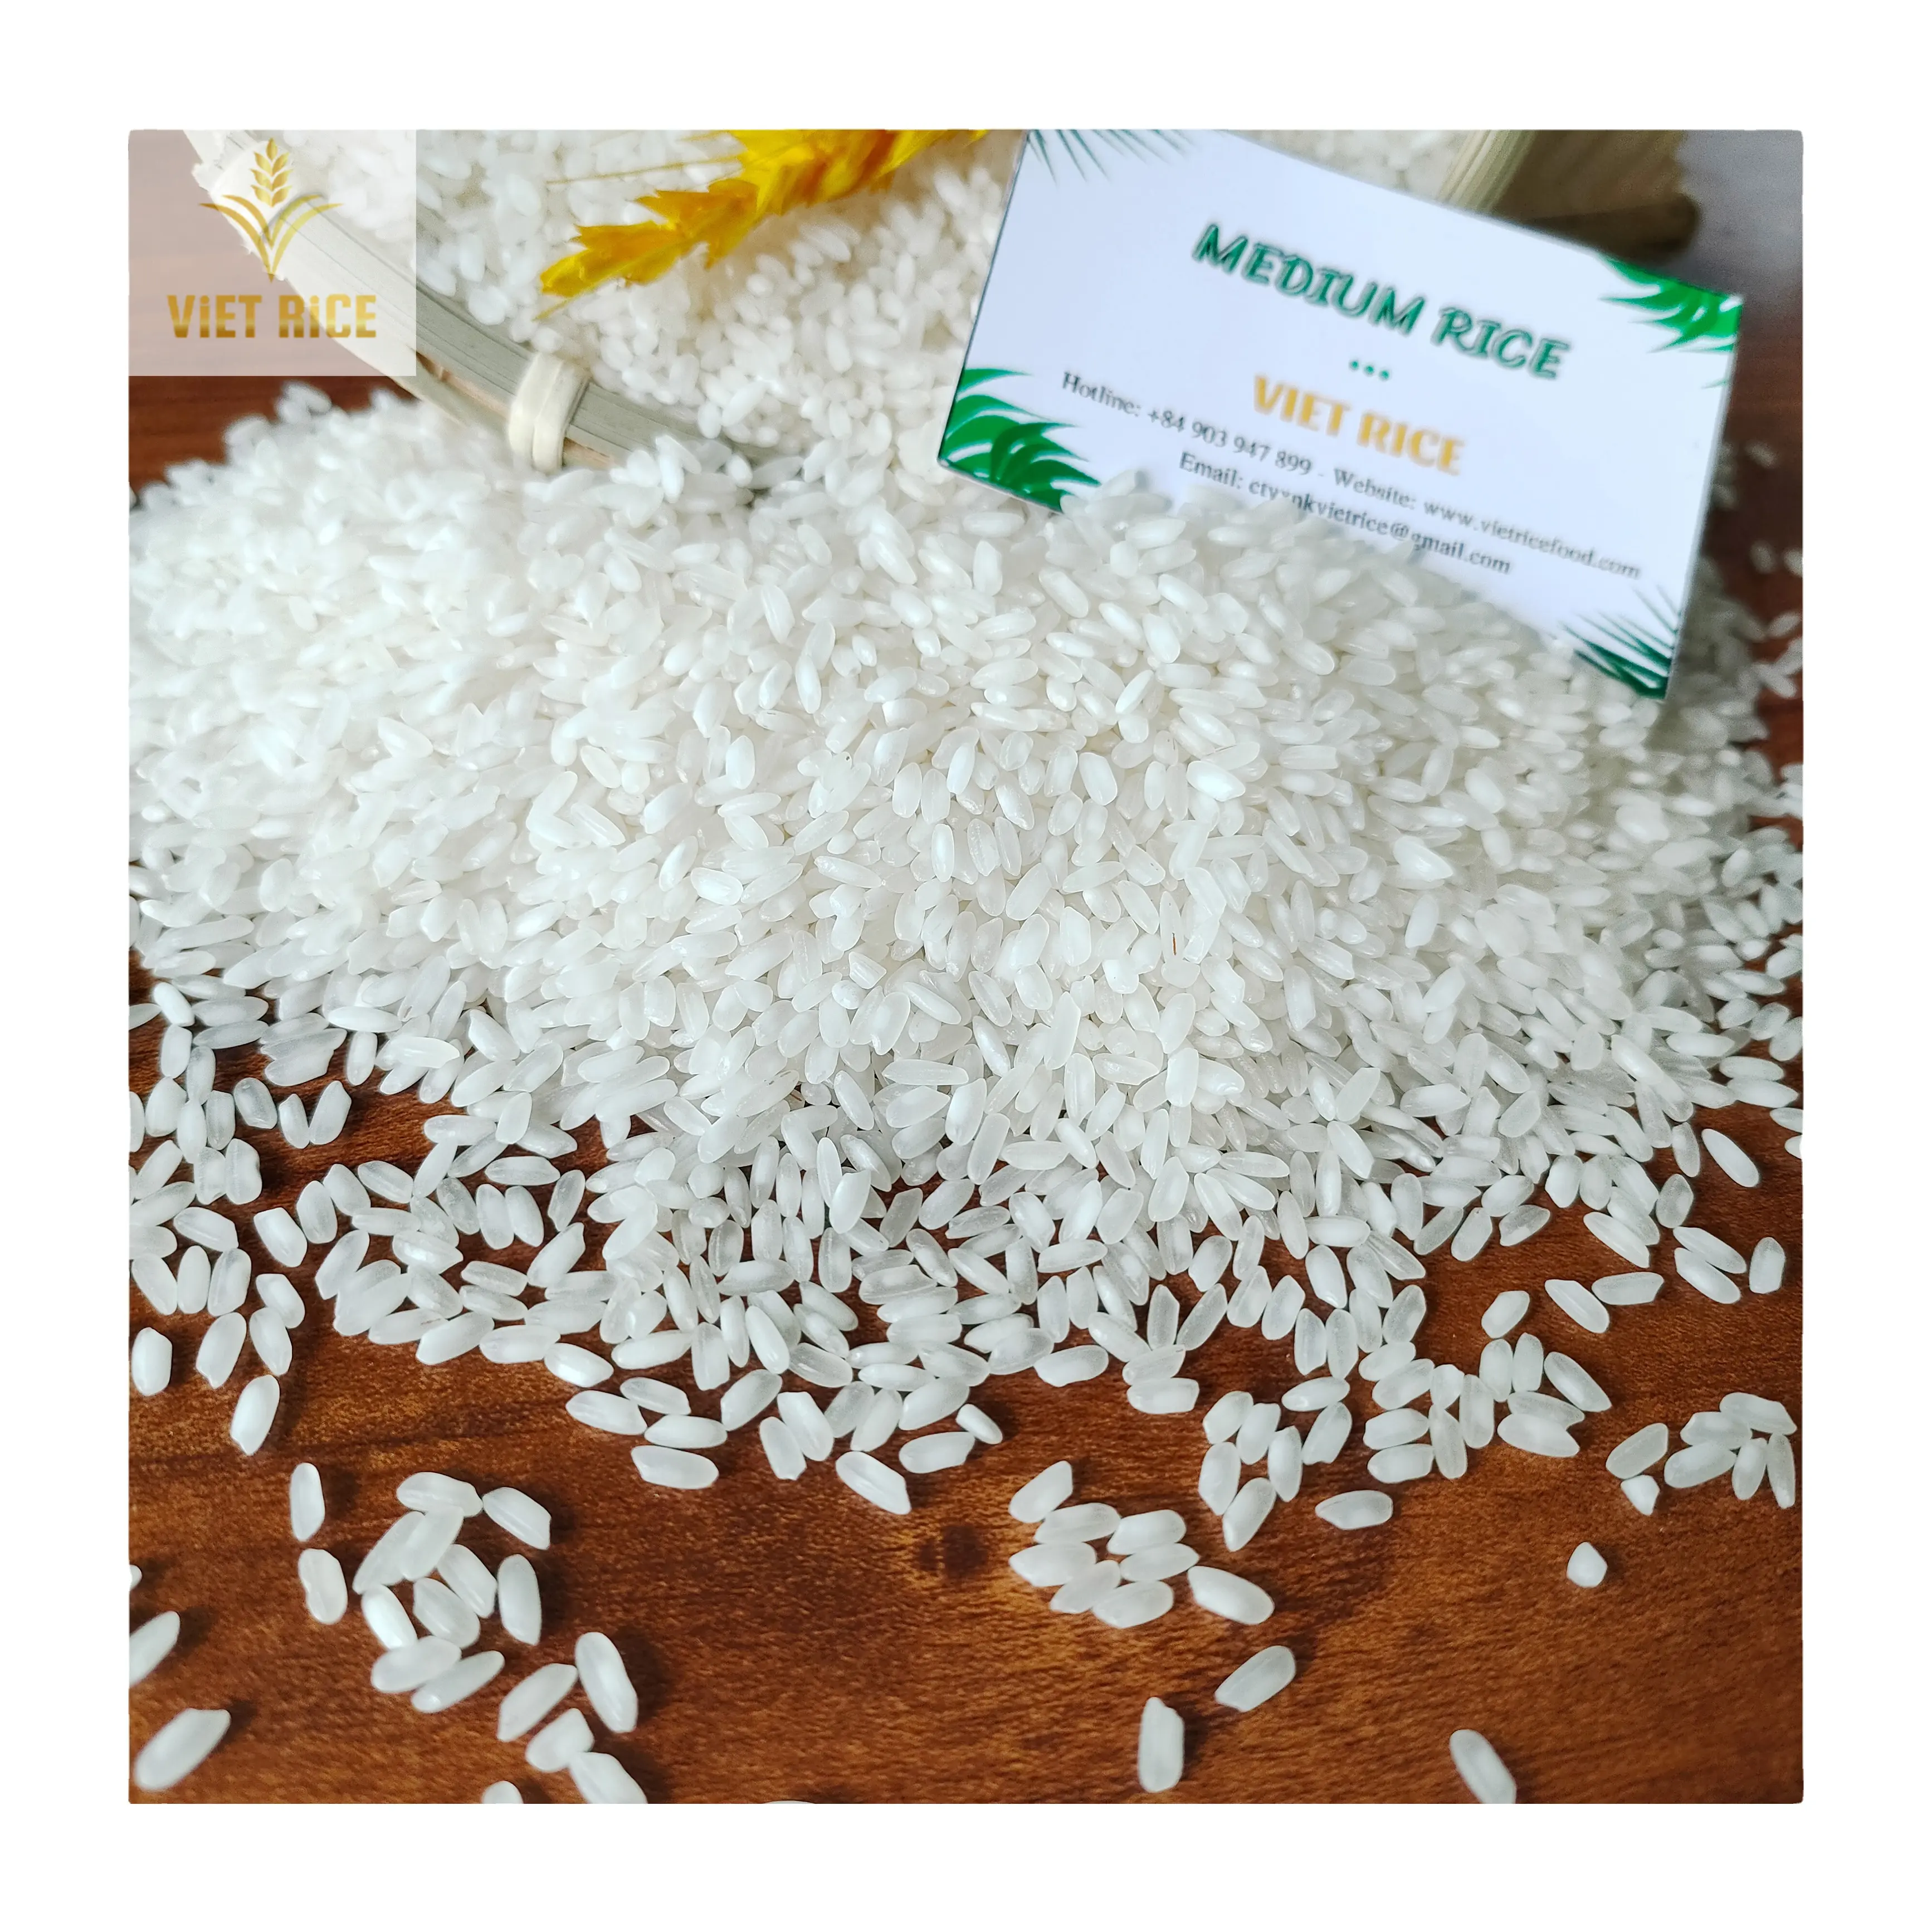 Vietnamese Rice - Medium Rice (Camolino) High Quality Large Quantity - Clean Rice For Export Competitive Price